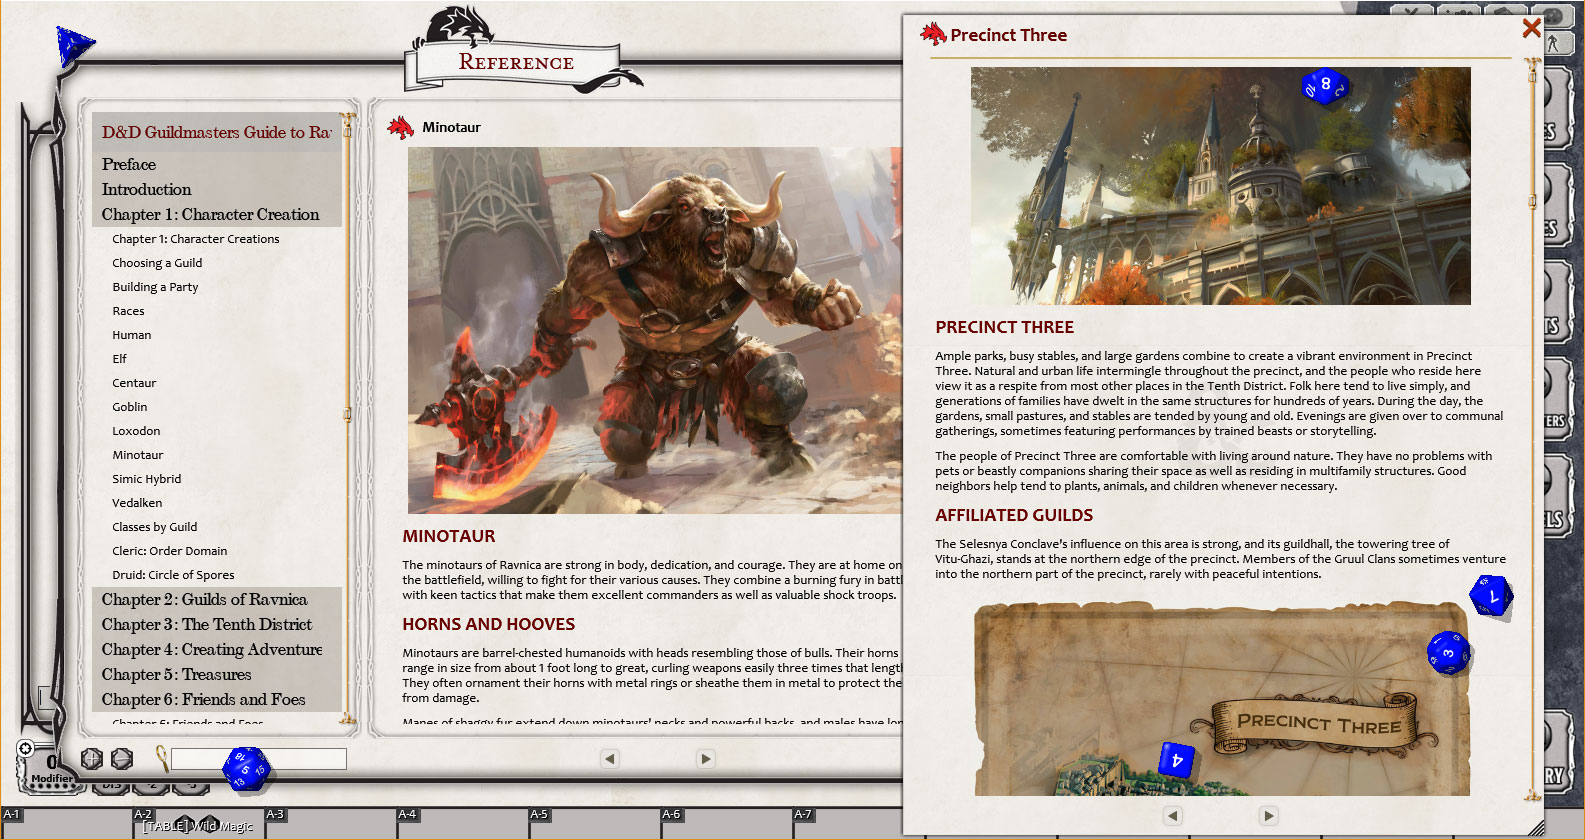 D&D Guildmasters' Guide to Ravnica for Fantasy Grounds